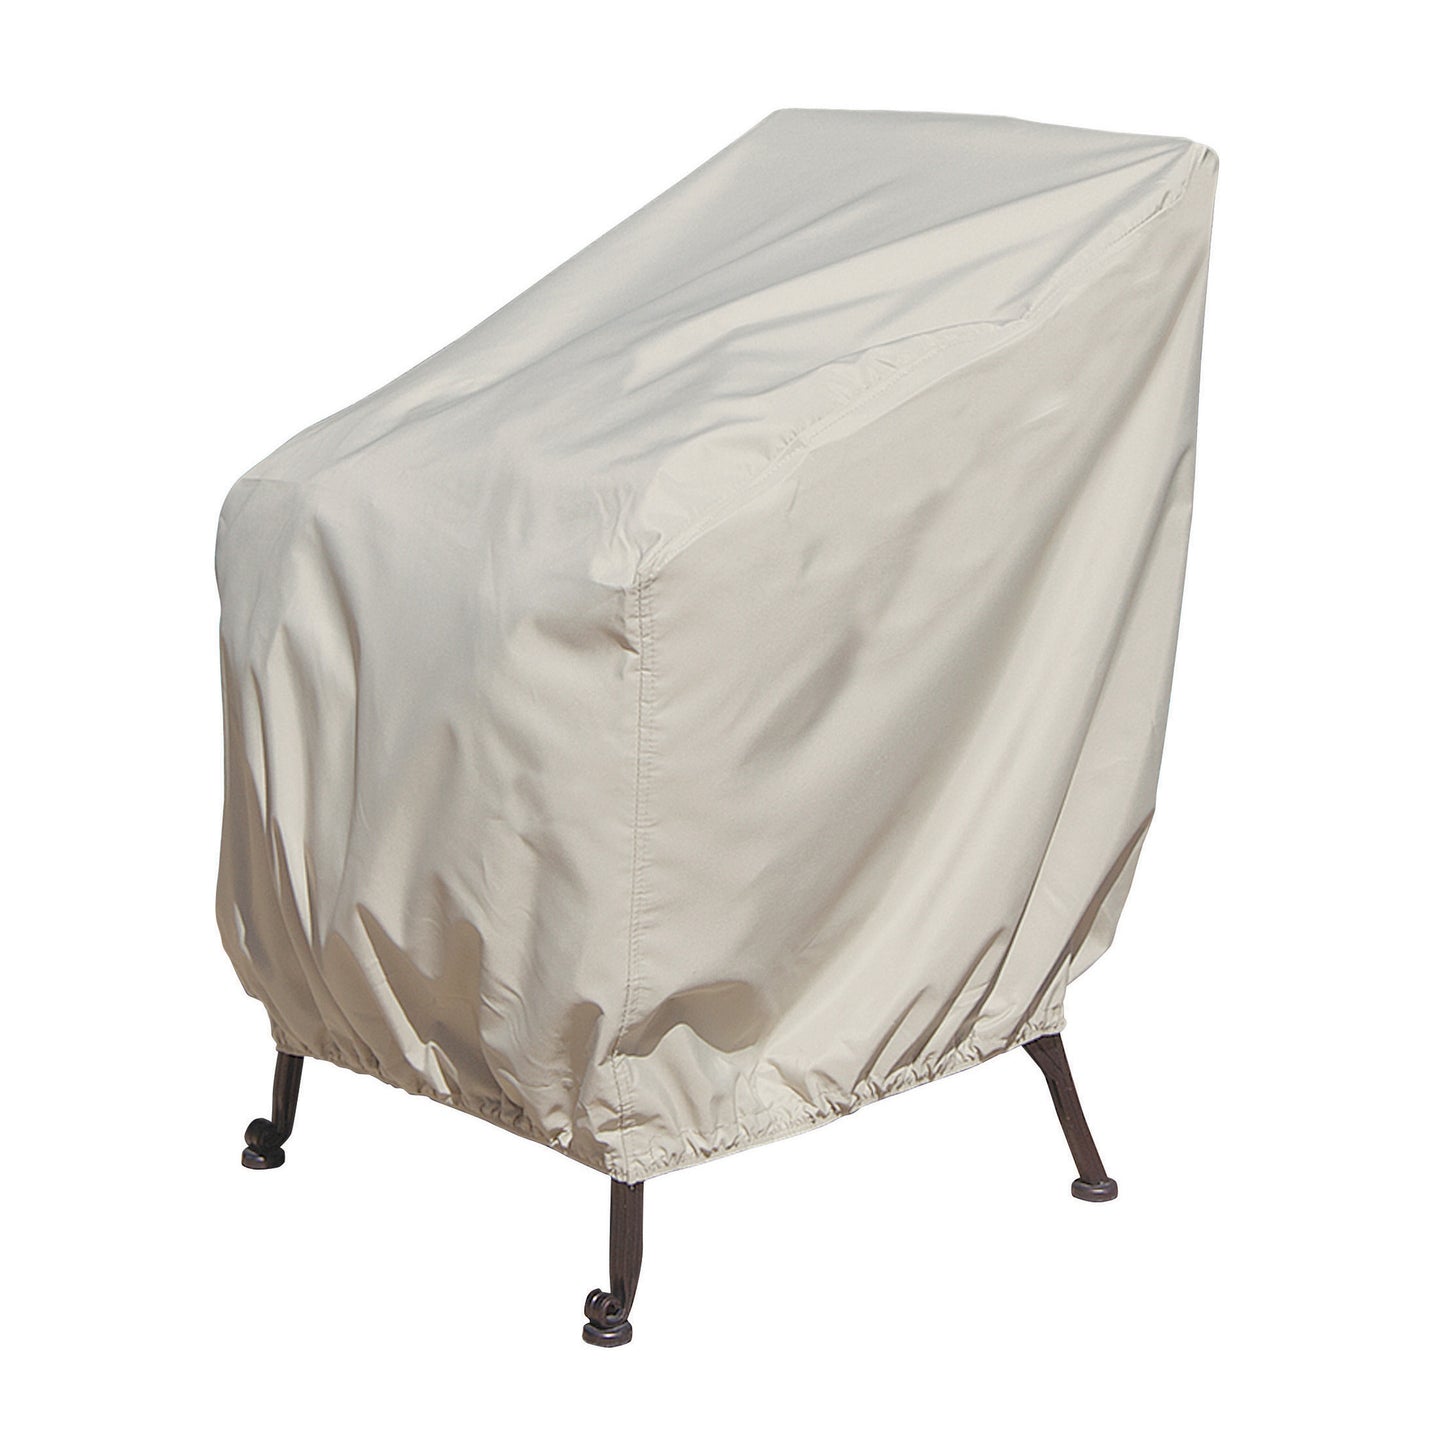 Keep your outdoor furniture outdoors with Treasure Garden's Club Chair Cover - available in two sizes, standard and extra large. Something for everyone! For more patio accessories, protective overs and just an all-around good old bbq time stop by our Barbecues Galore stores in Toronto, Burlington, Oakville and Calgary, Alberta.